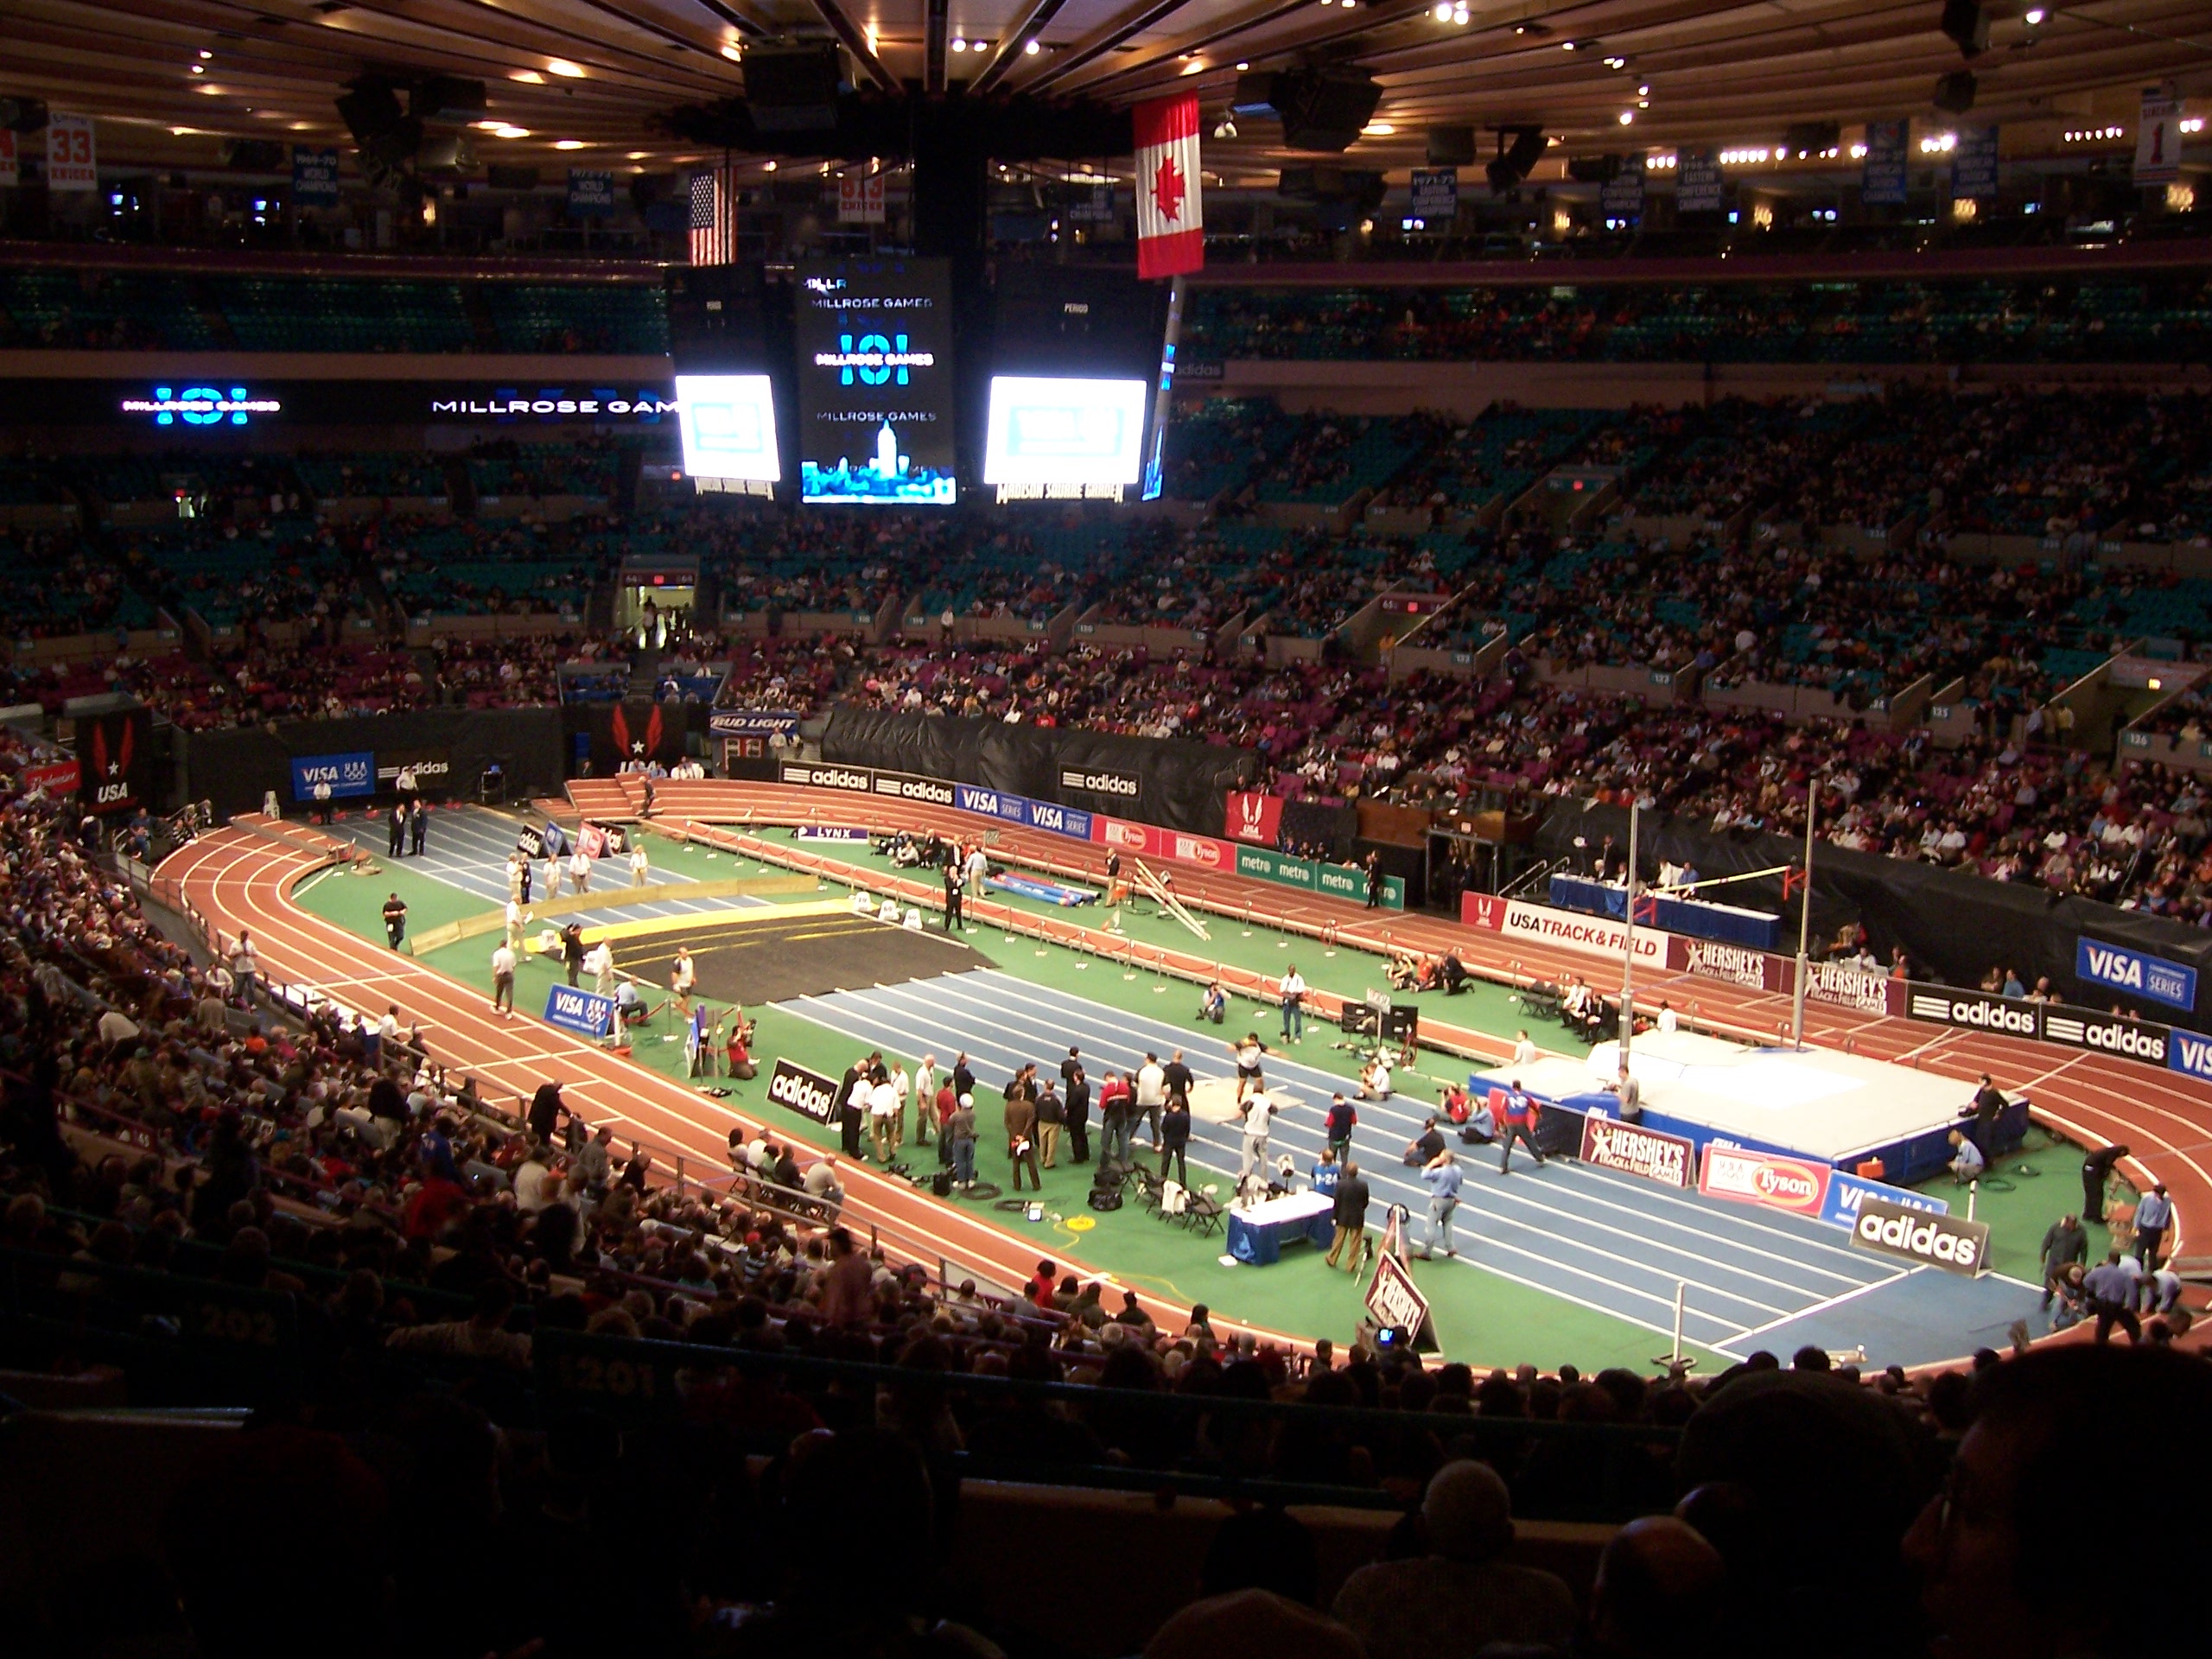 This is always one of the most exciting indoor track and field events of the